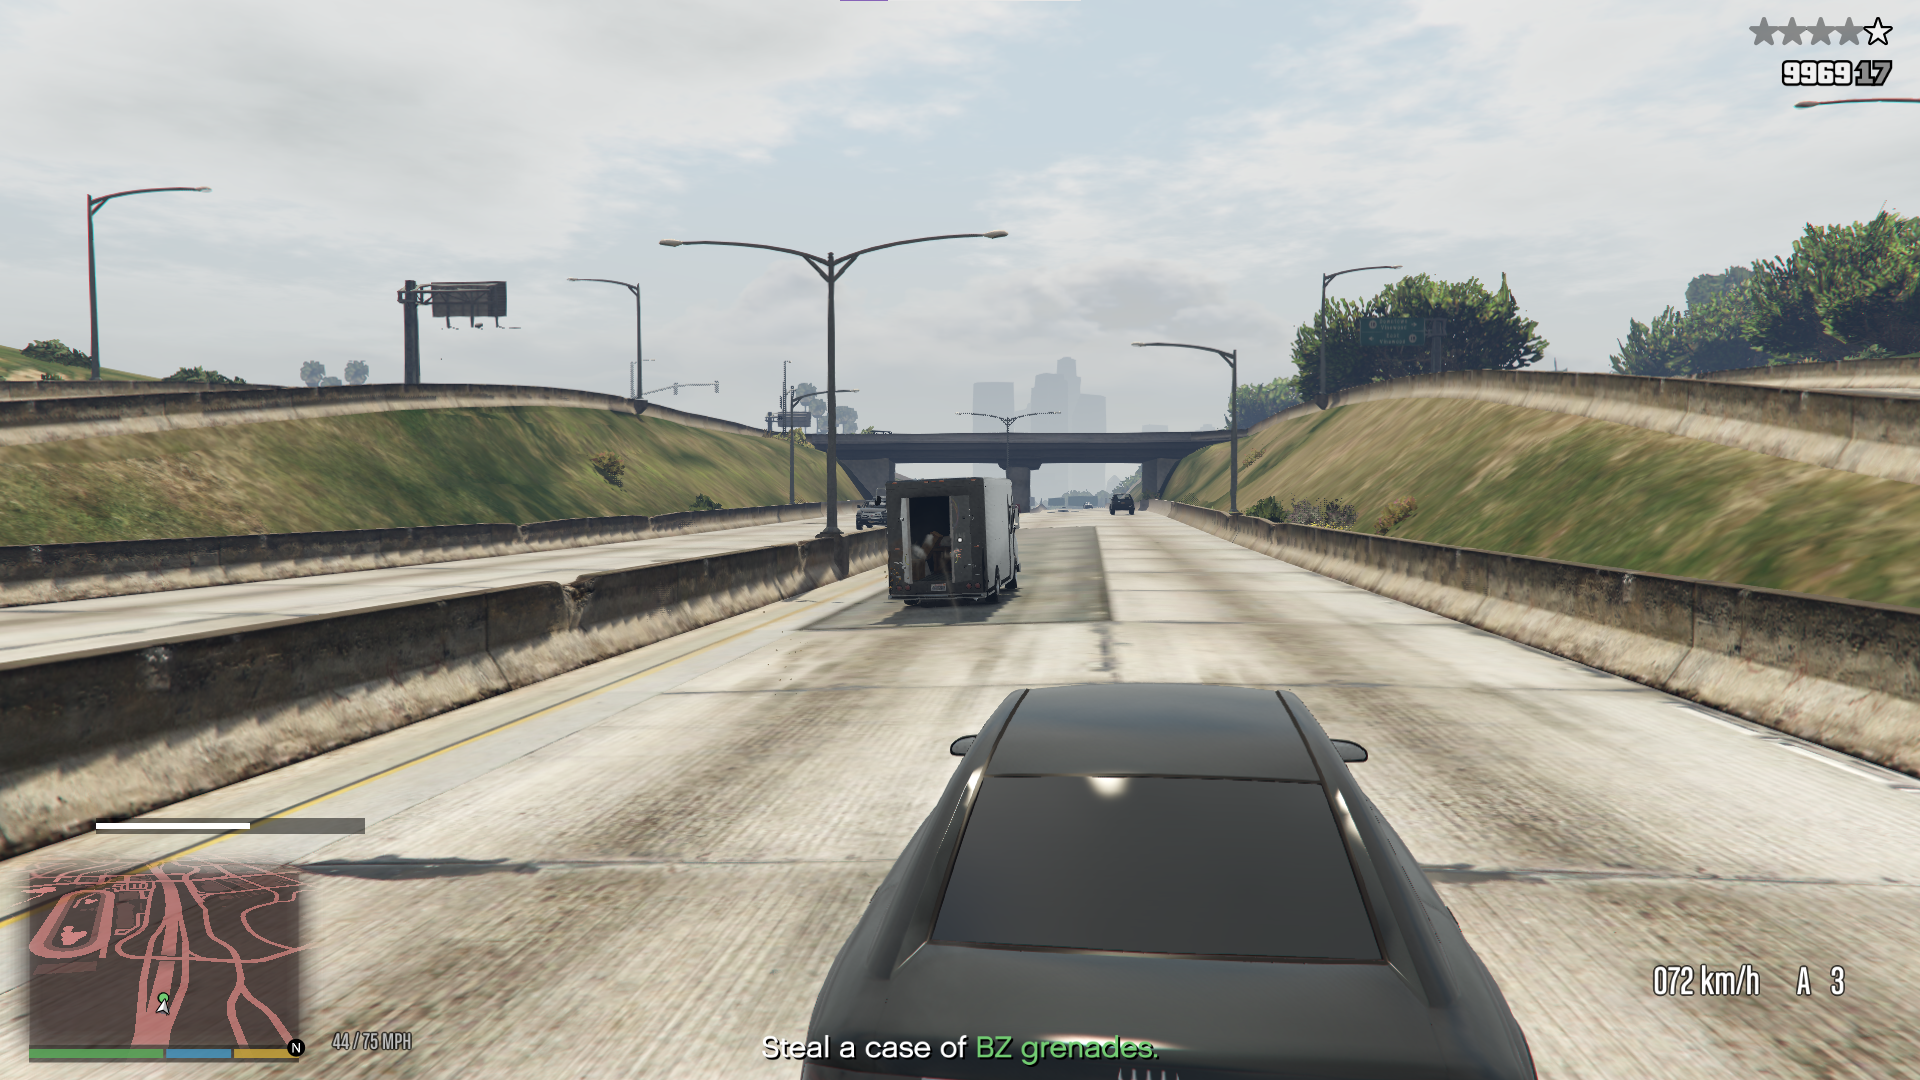 How to Replay Missions in GTA 5